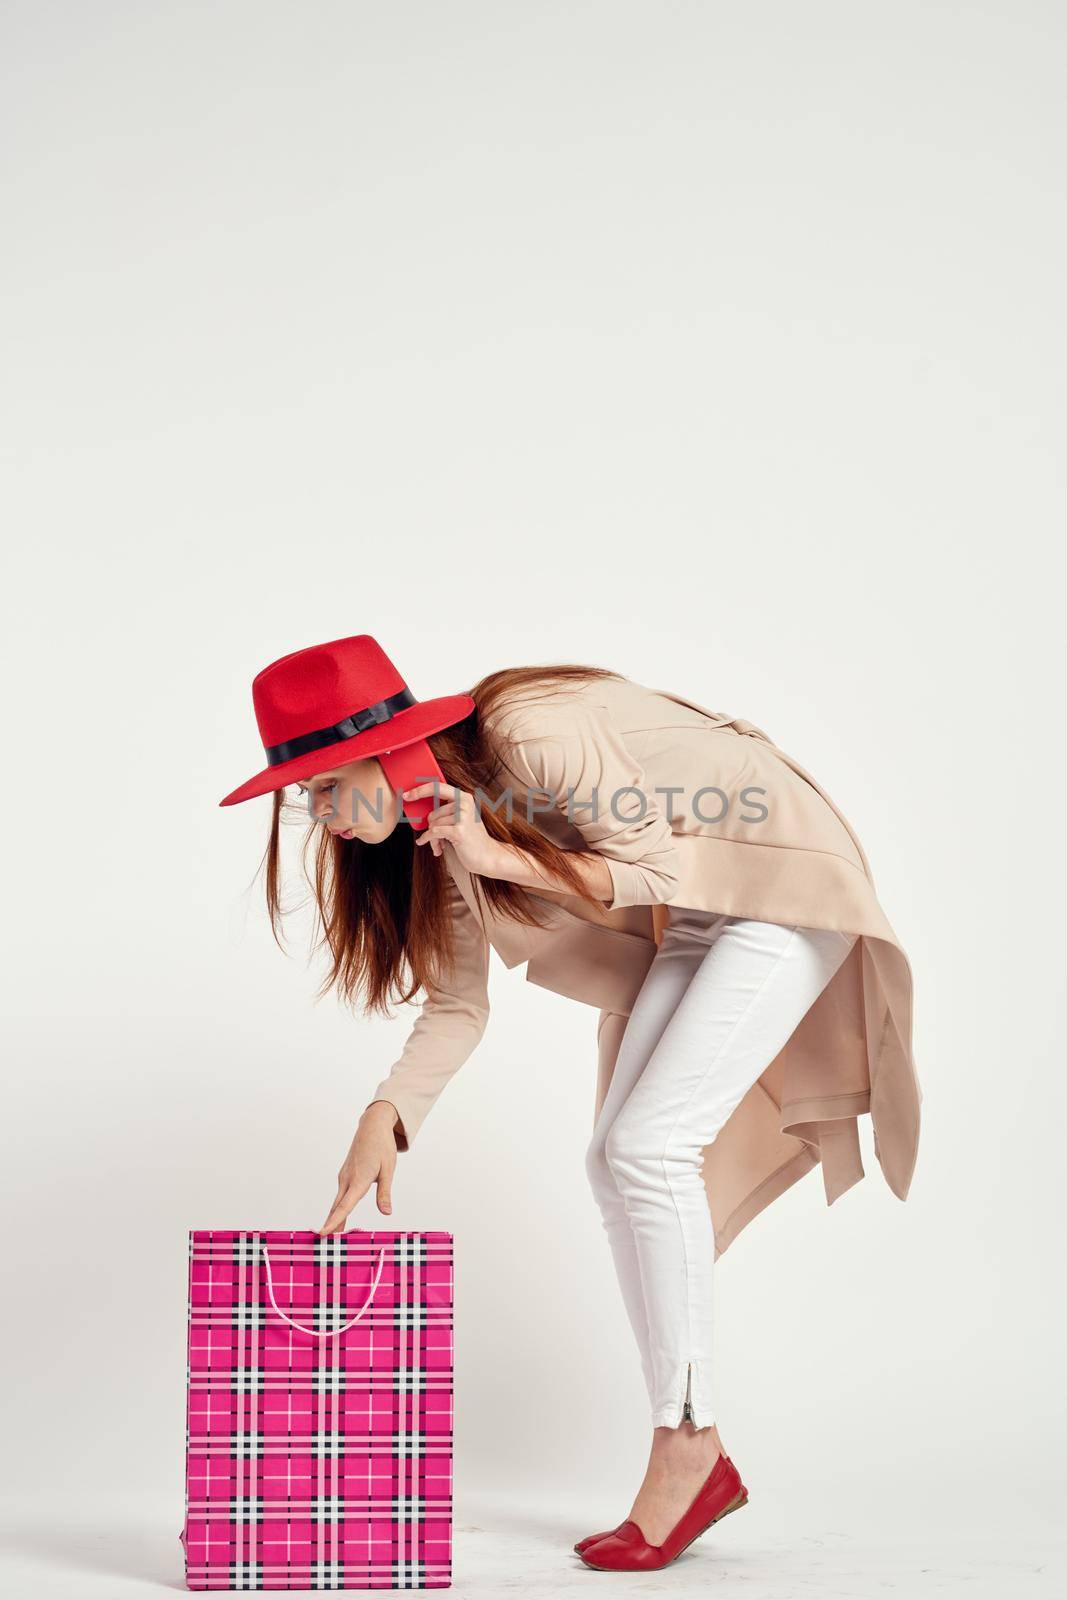 cheerful woman wearing a red hat posing shopping fun light background by Vichizh